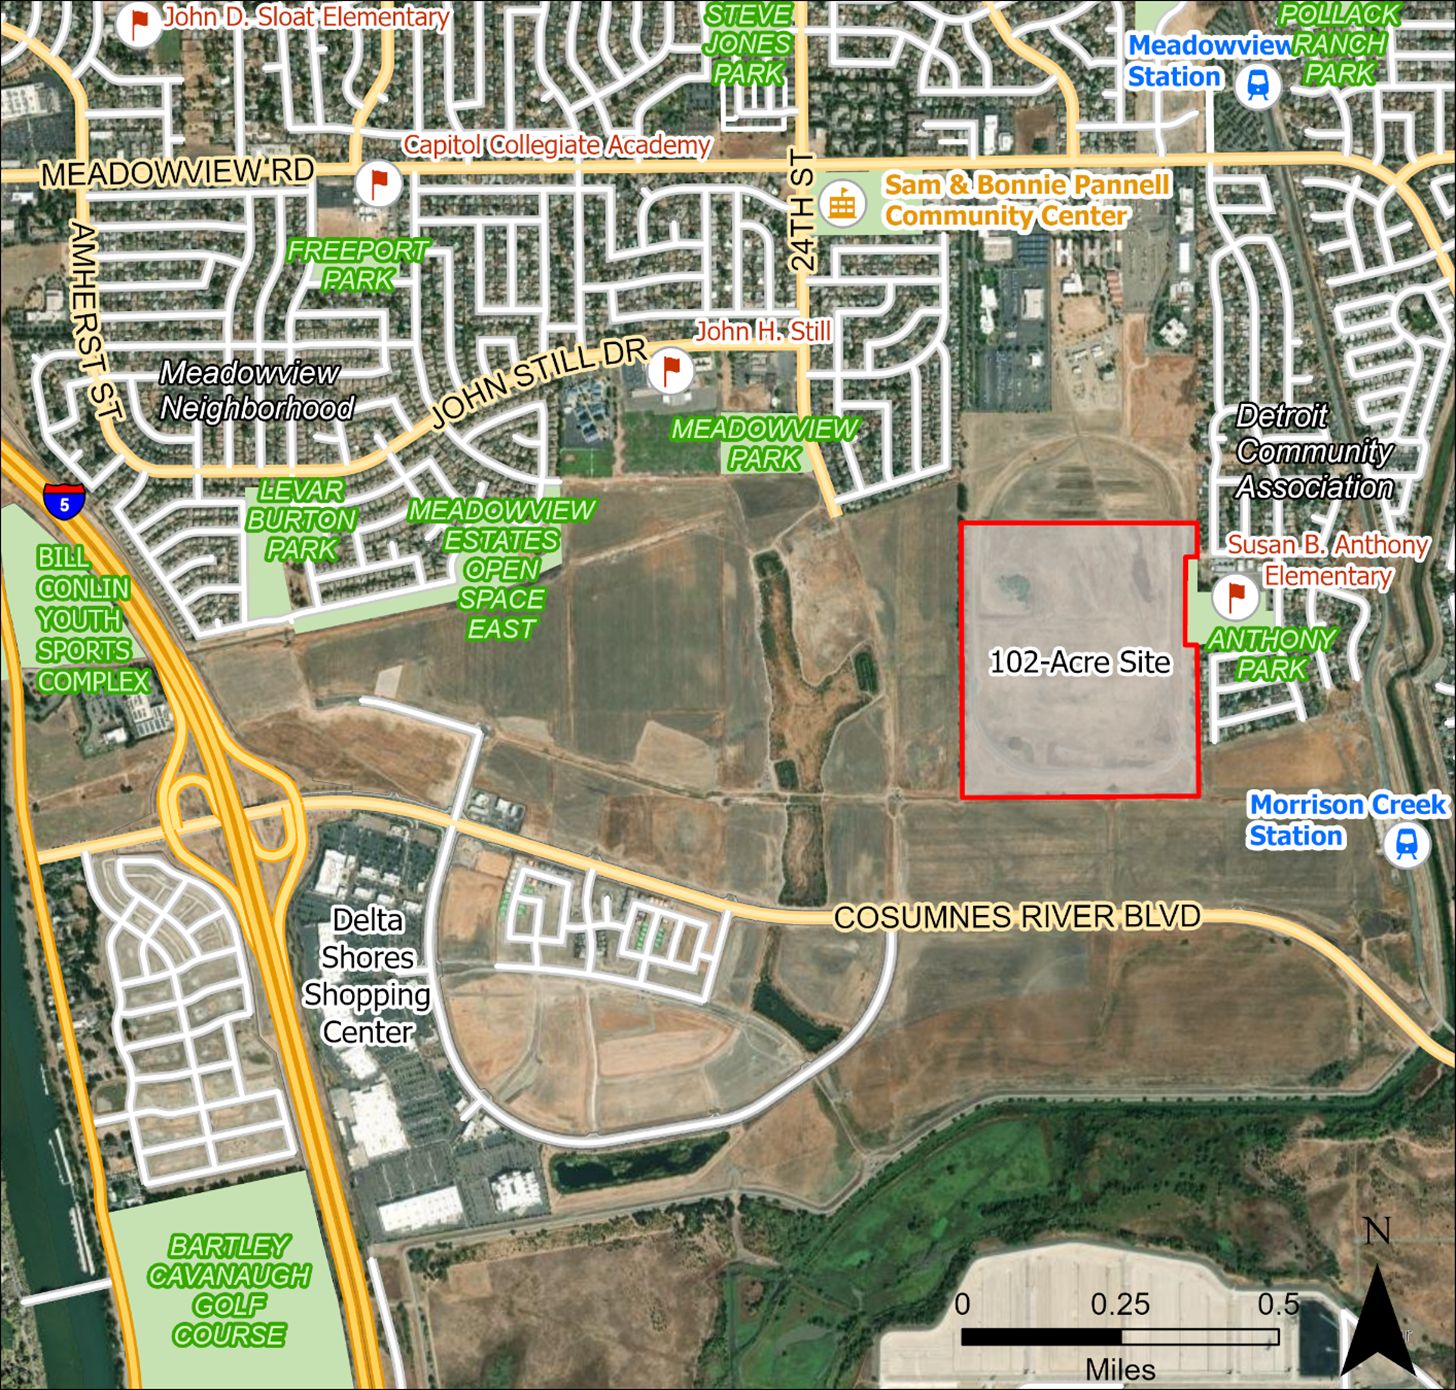 map showing where the 102-acre site is located, north of Cosumnes River Blvd and East of I-5 freeway and behind the Susan B Anthony Elementary School